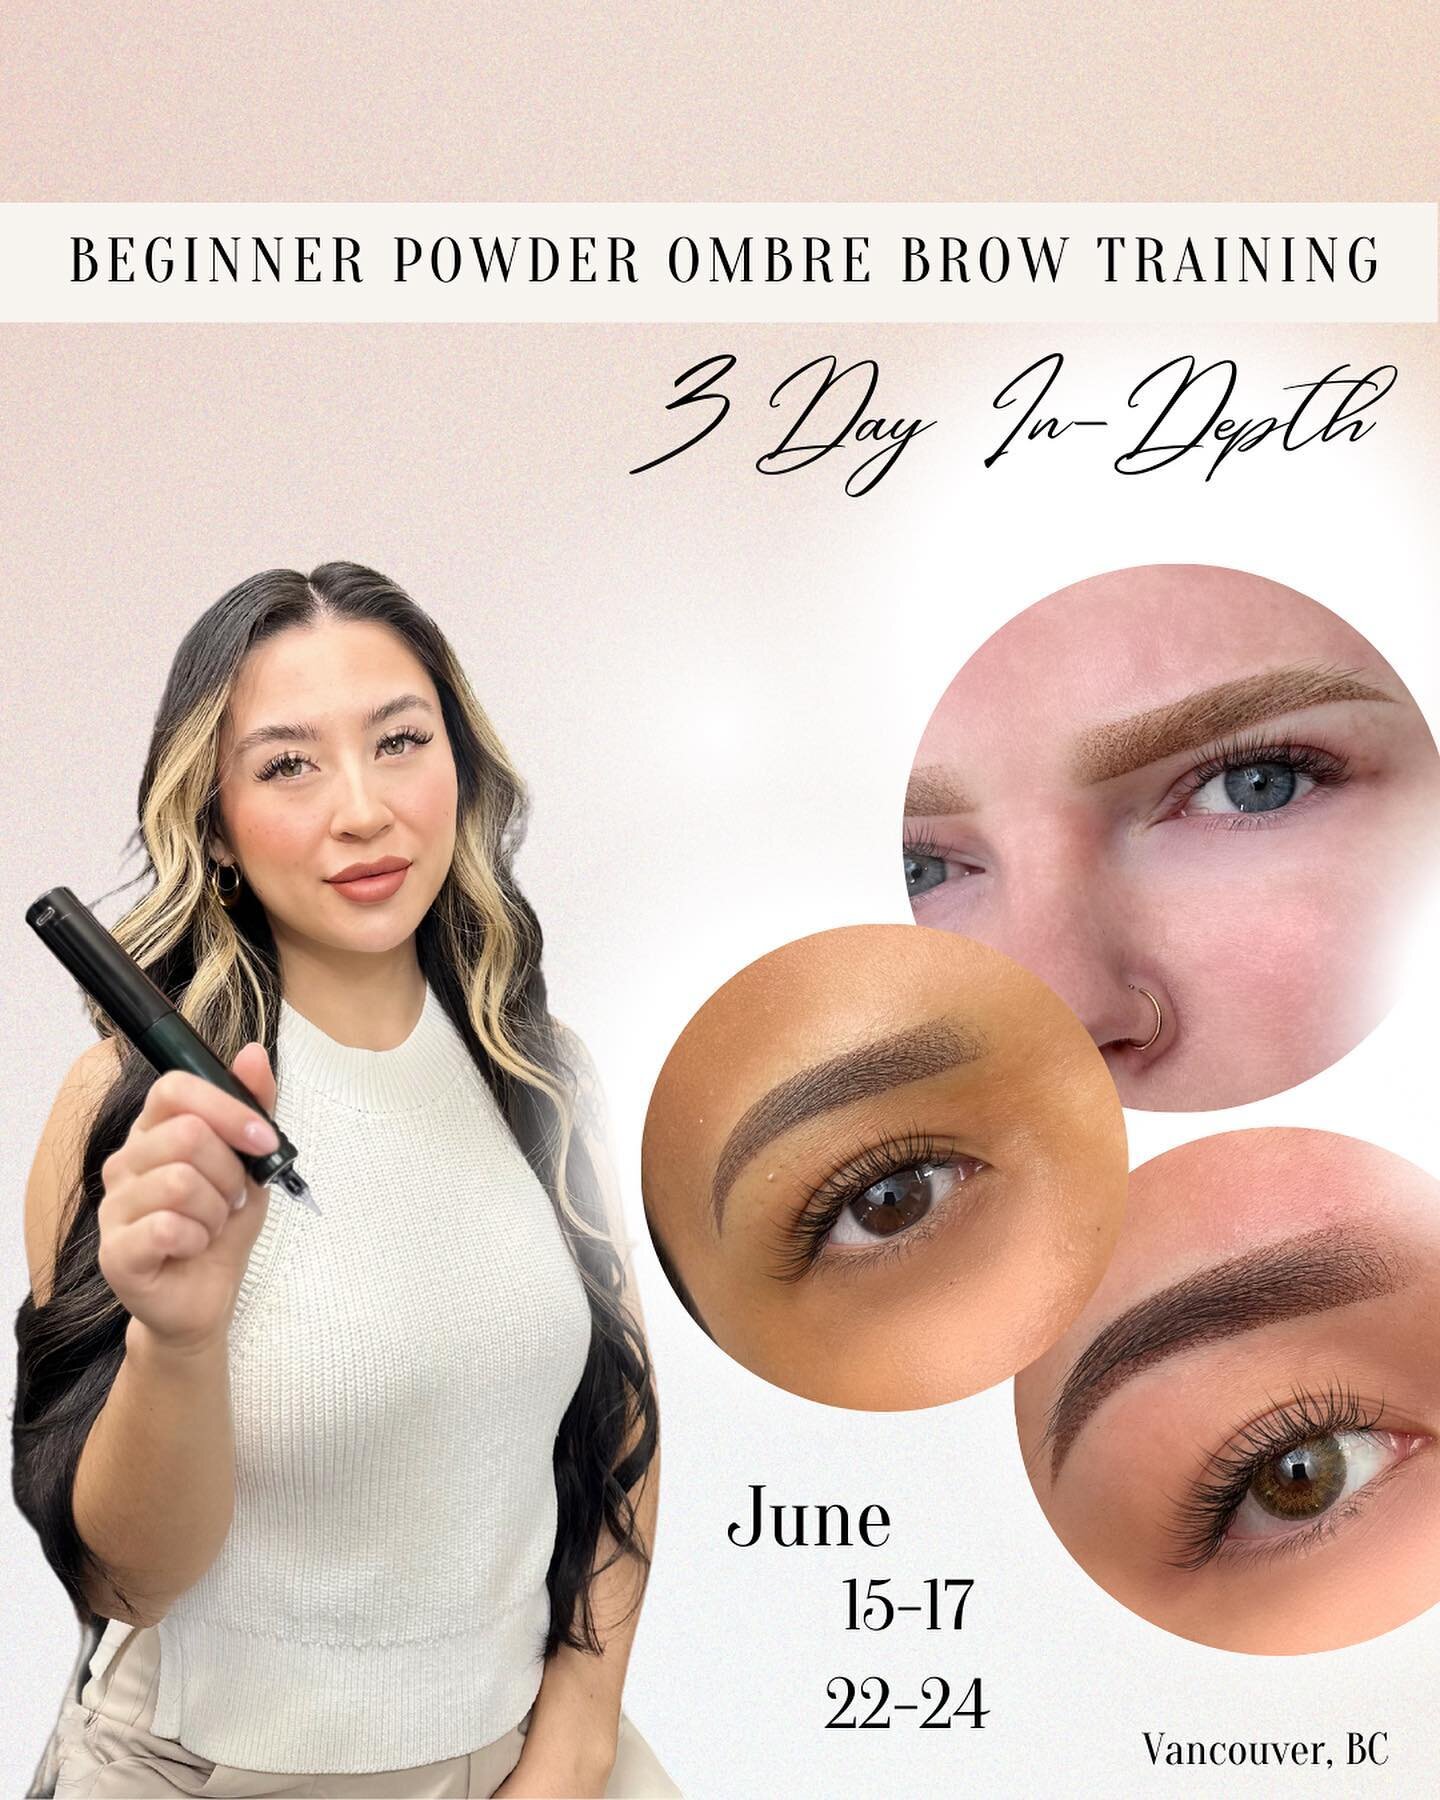 𝐁𝐈𝐆 𝐍𝐄𝐖𝐒 𝐋𝐎𝐕𝐄𝐒📣

I'm so excited to announce that I'll be launching my Beginner Powder Ombre Course this upcoming June! 🍾&nbsp;

This course will teach you all the basics of Powder Ombre and everything you need to know to get started as 